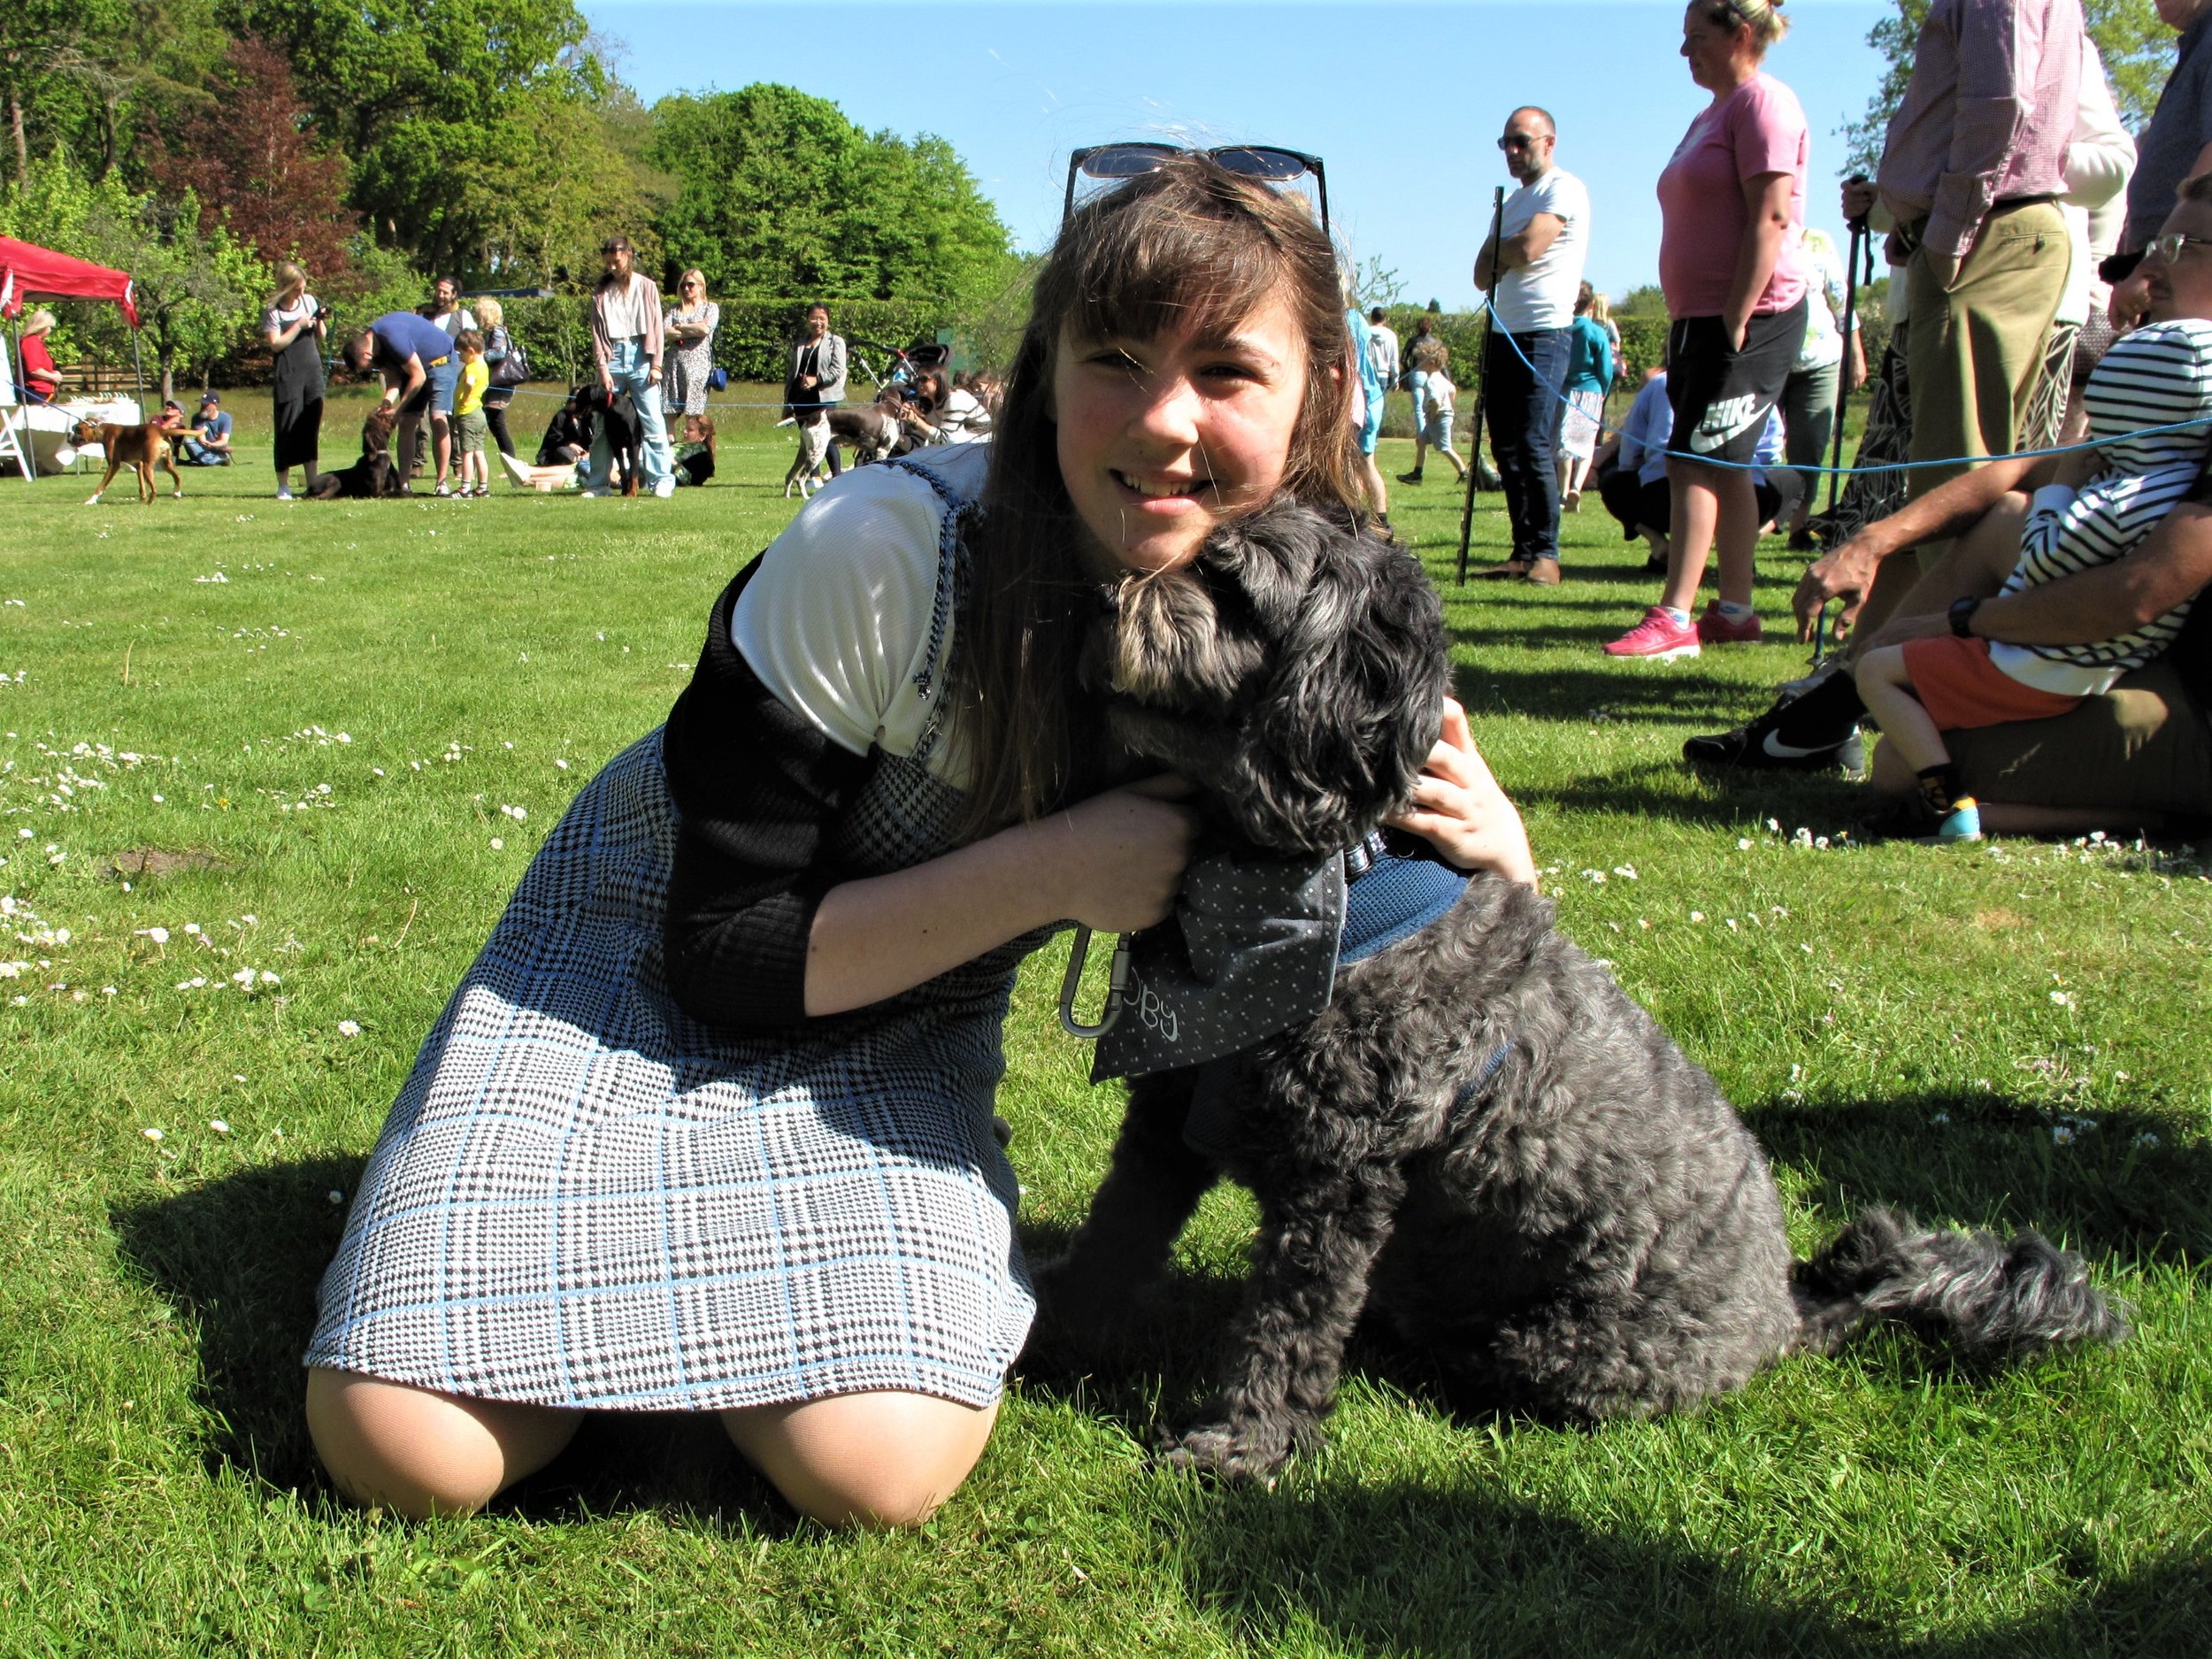 Lilly Jarvis (12) with Scooby, winner of Dog with the Best Trick_credit Stody Lodge Gardens.JPG